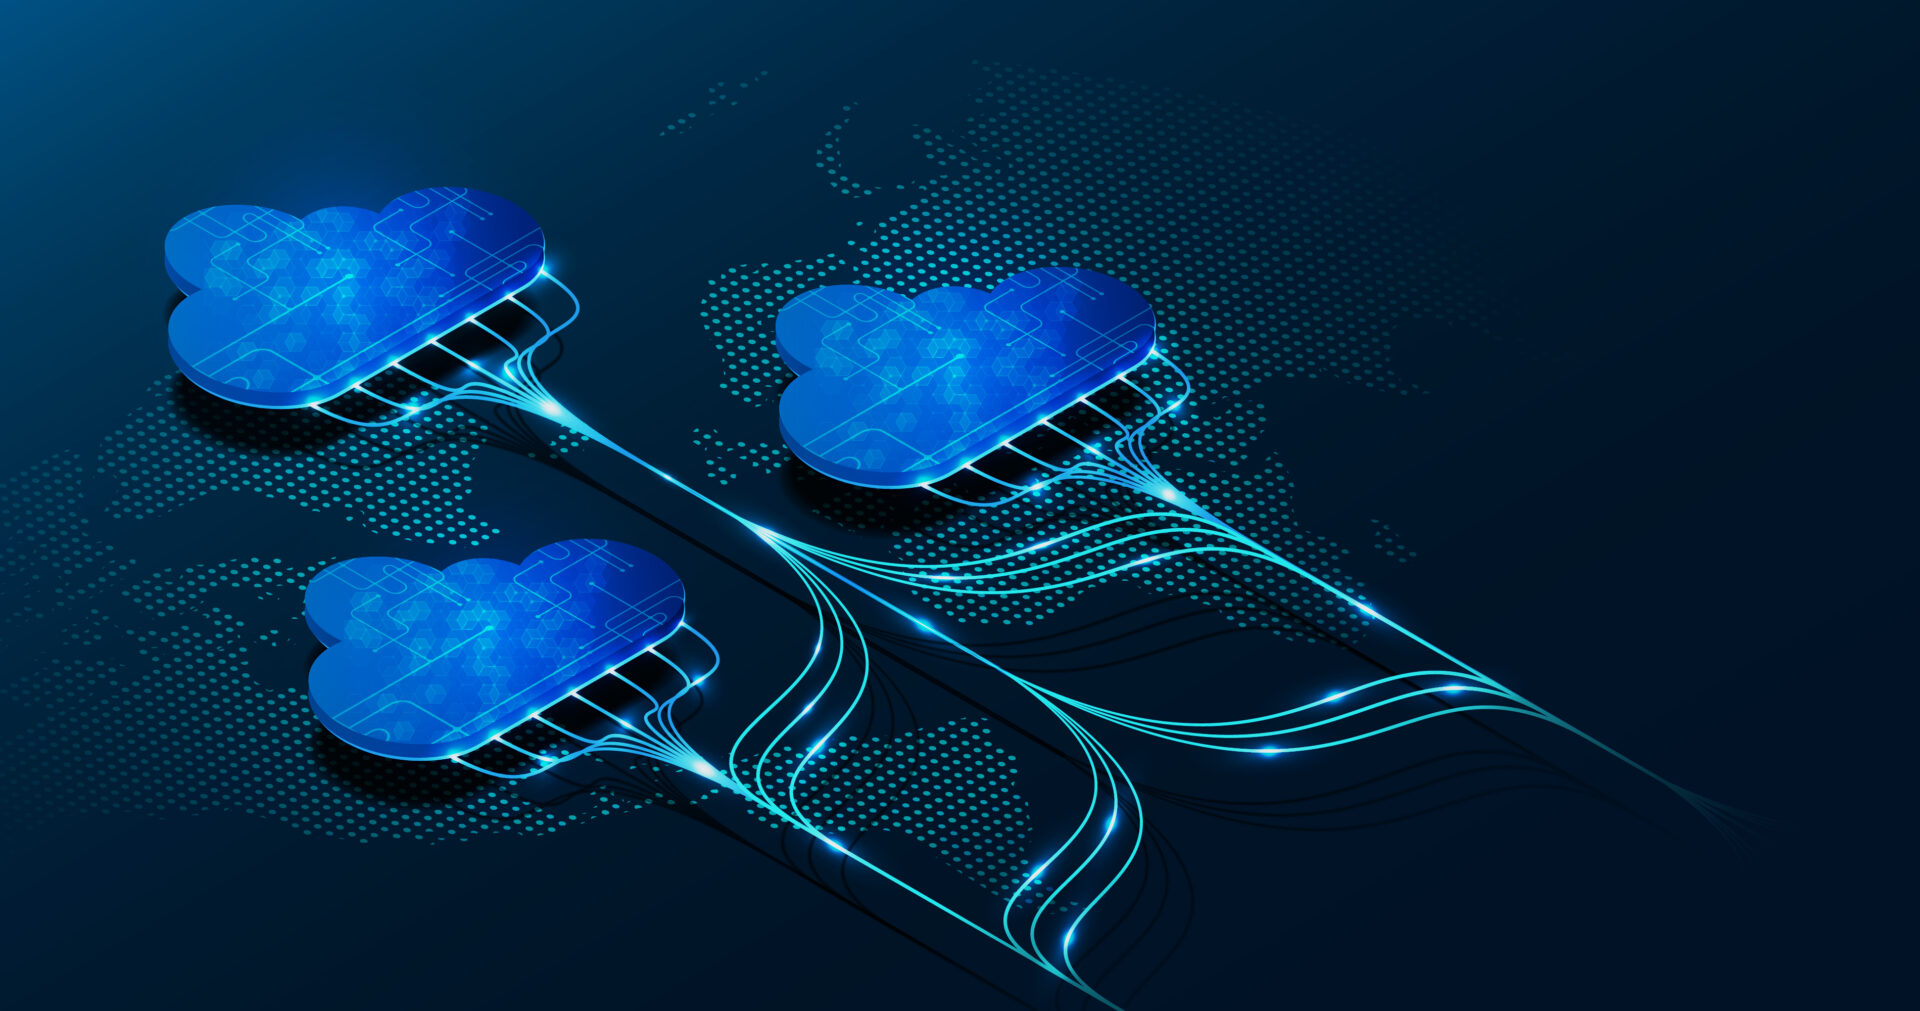 Security Is Top of Mind for Multi-cloud Networks